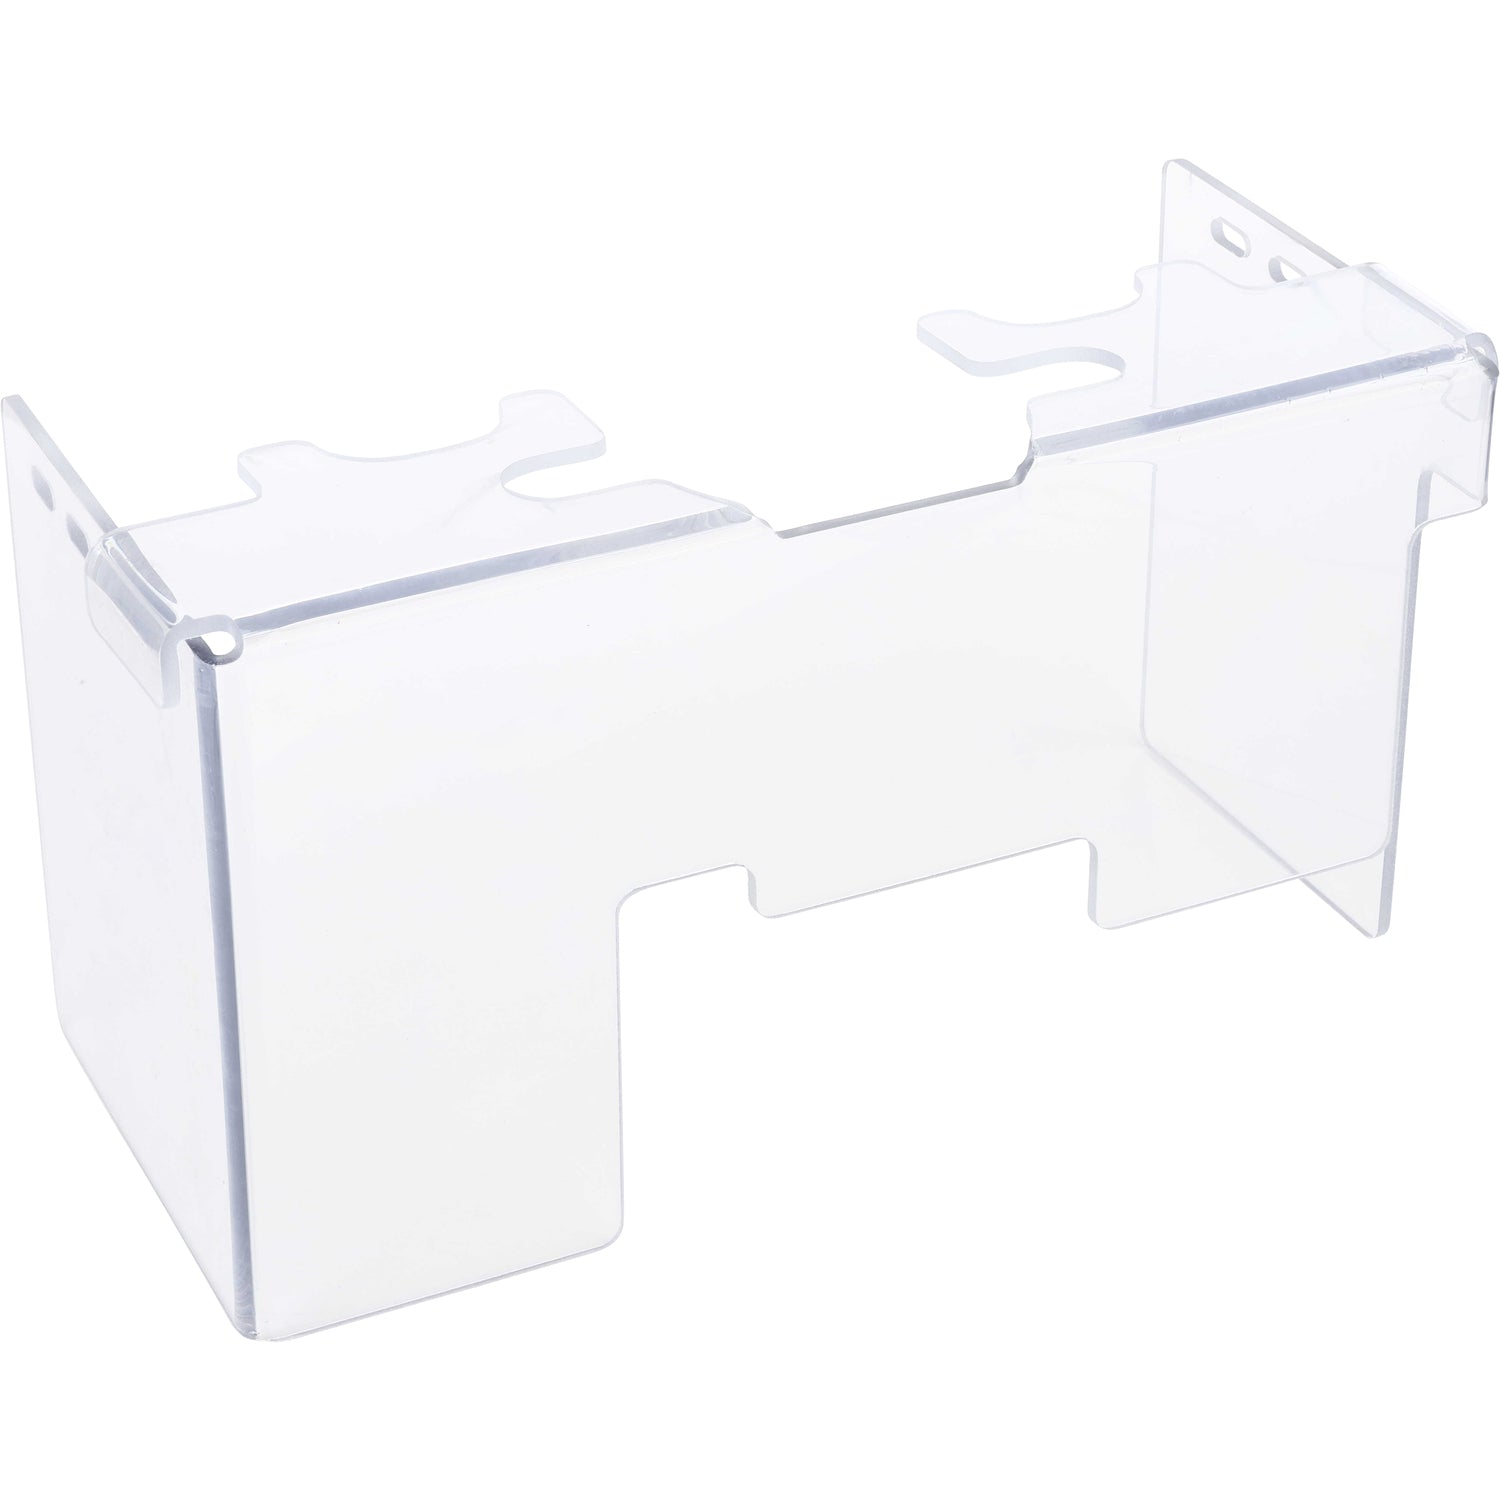 Clear bent polycarbonate guarding on a white background. 